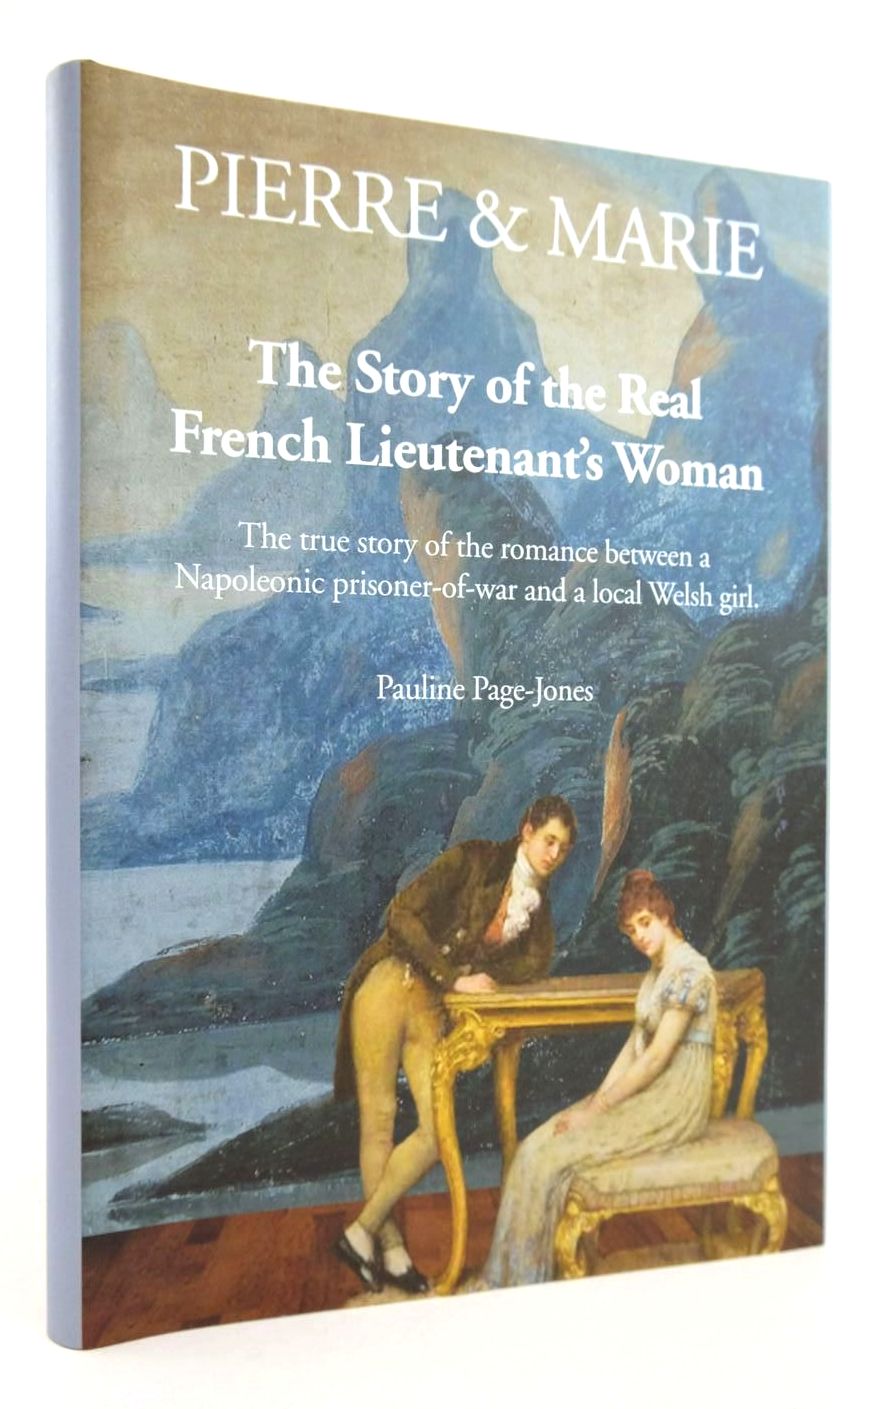 Photo of PIERRE &amp; MARIE THE STORY OF THE REAL FRENCH LIEUTENANT'S WOMAN written by Page-Jones, Pauline published by Pauline Page-Jones (STOCK CODE: 2132312)  for sale by Stella & Rose's Books